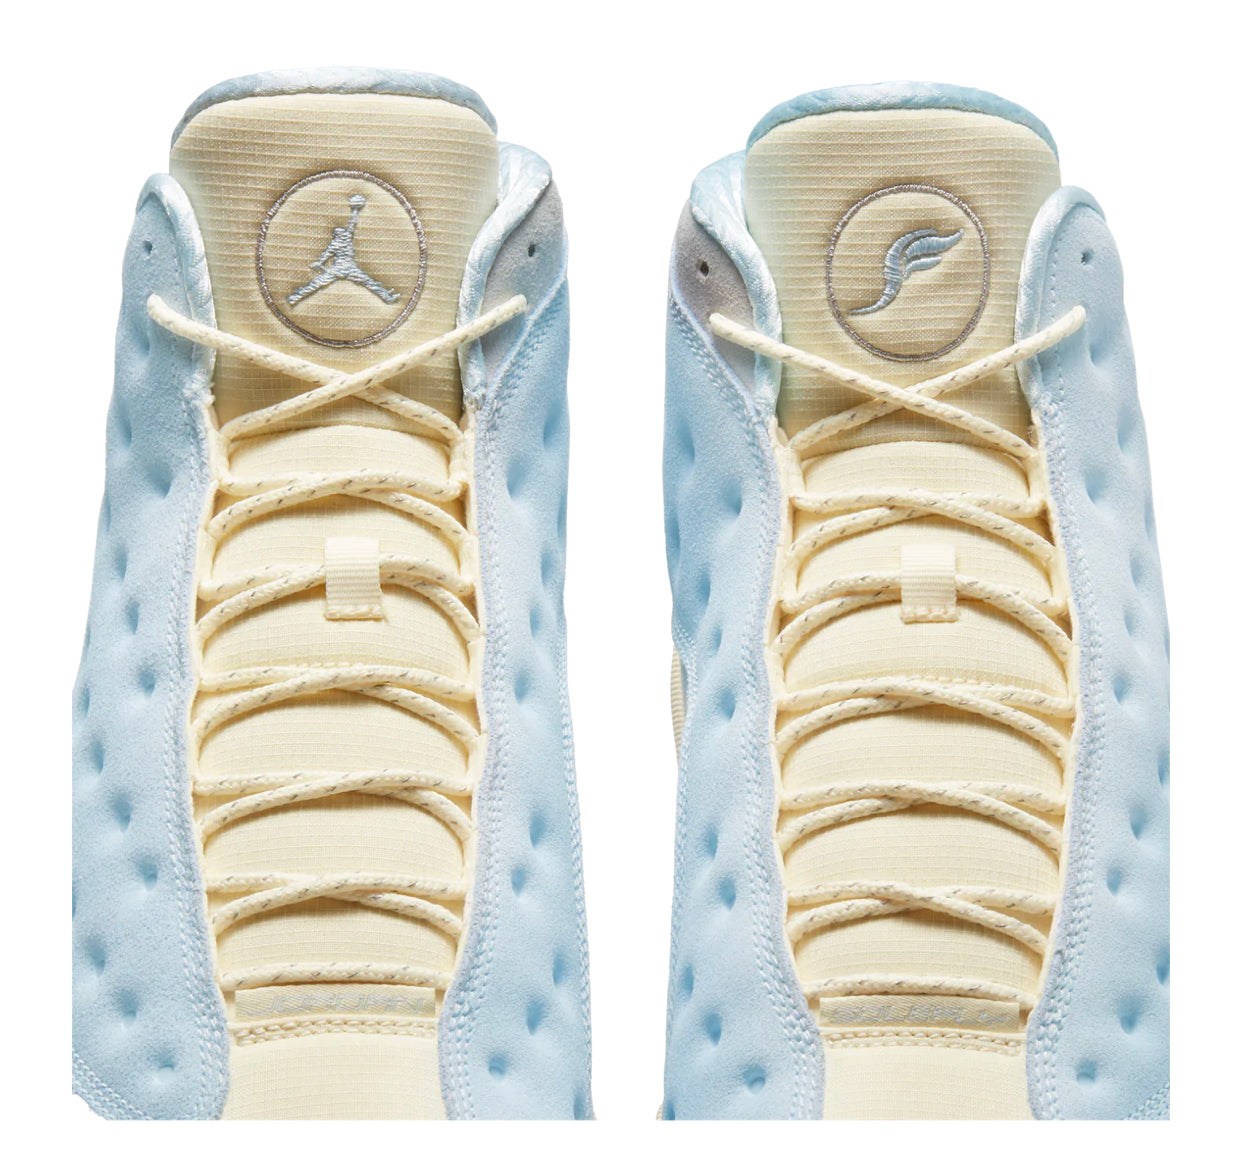 Retro Air Jordan 13 SP Sole Fly “I’d Rather Be Fishing” 2022